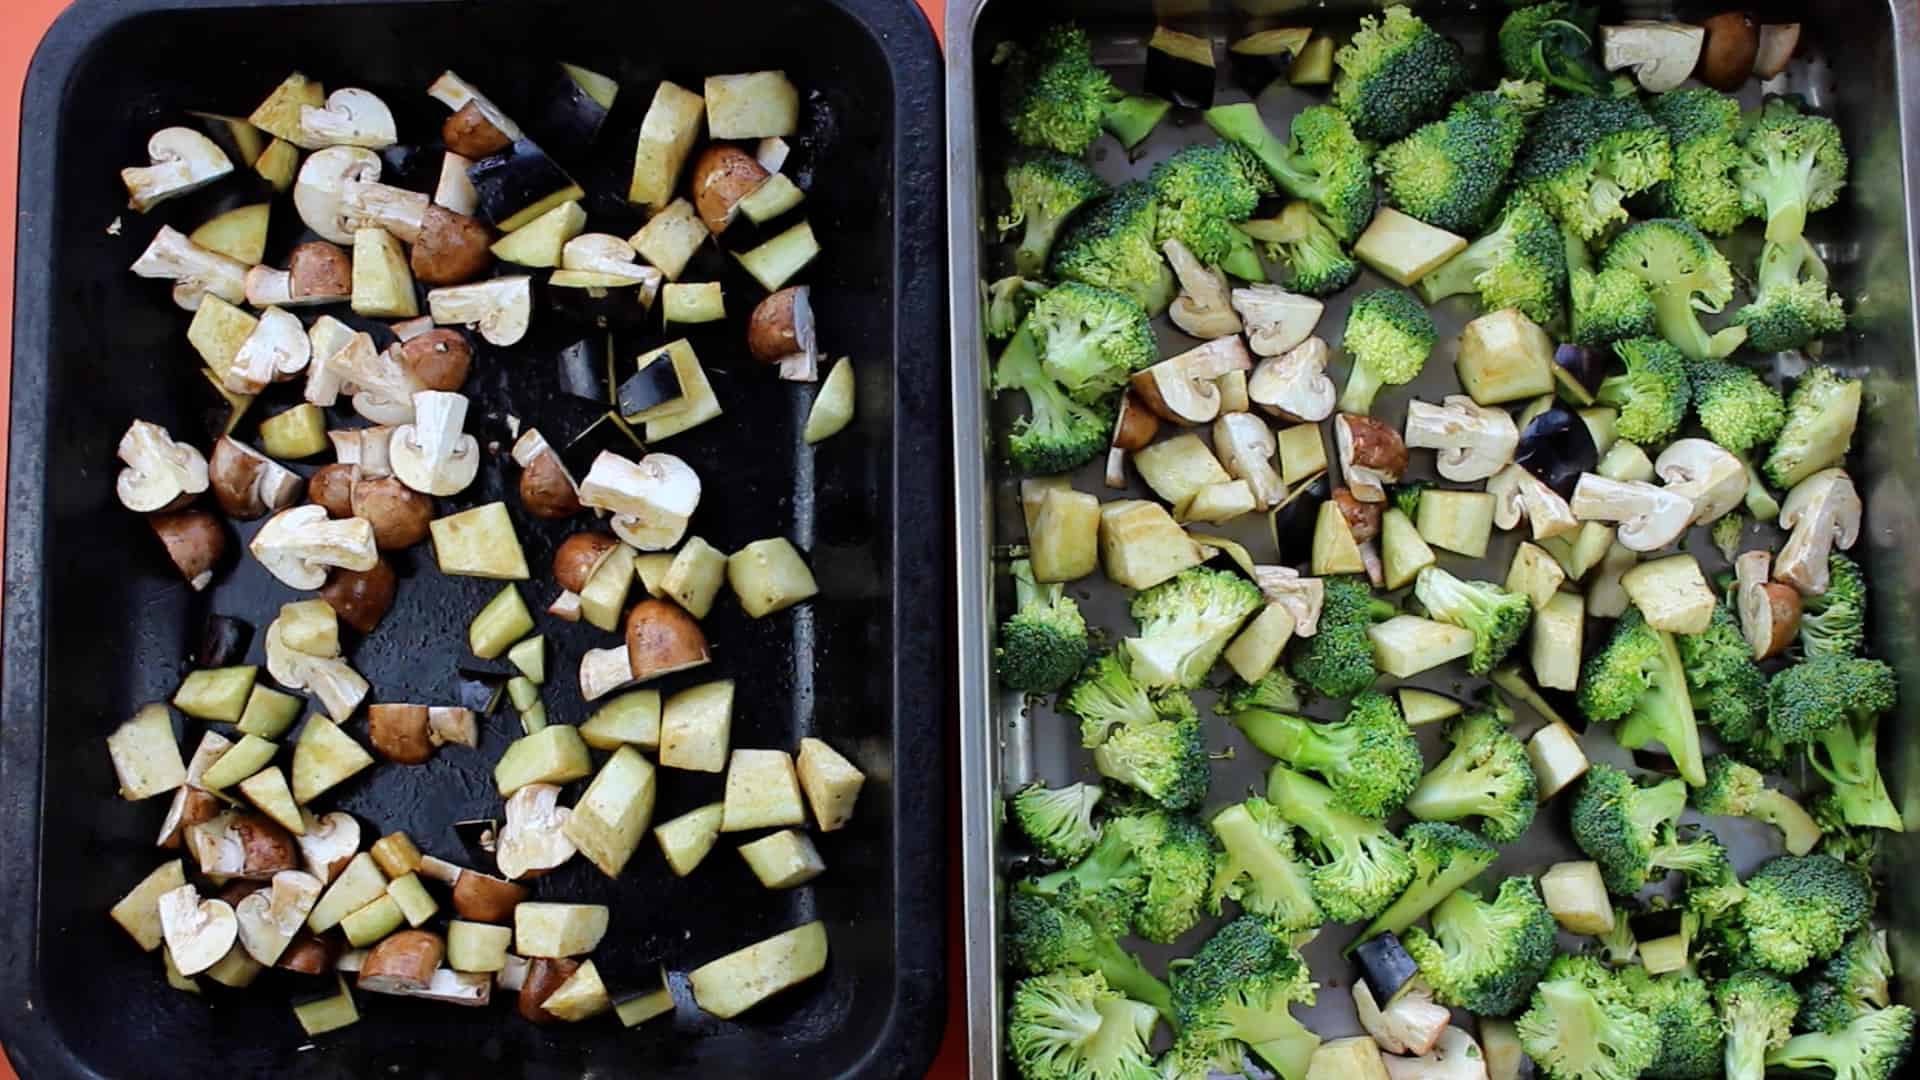 2 trays on chopped vegetables, one with courgettes and mushrooms and the second with broccoli mushrooms and courgettes.